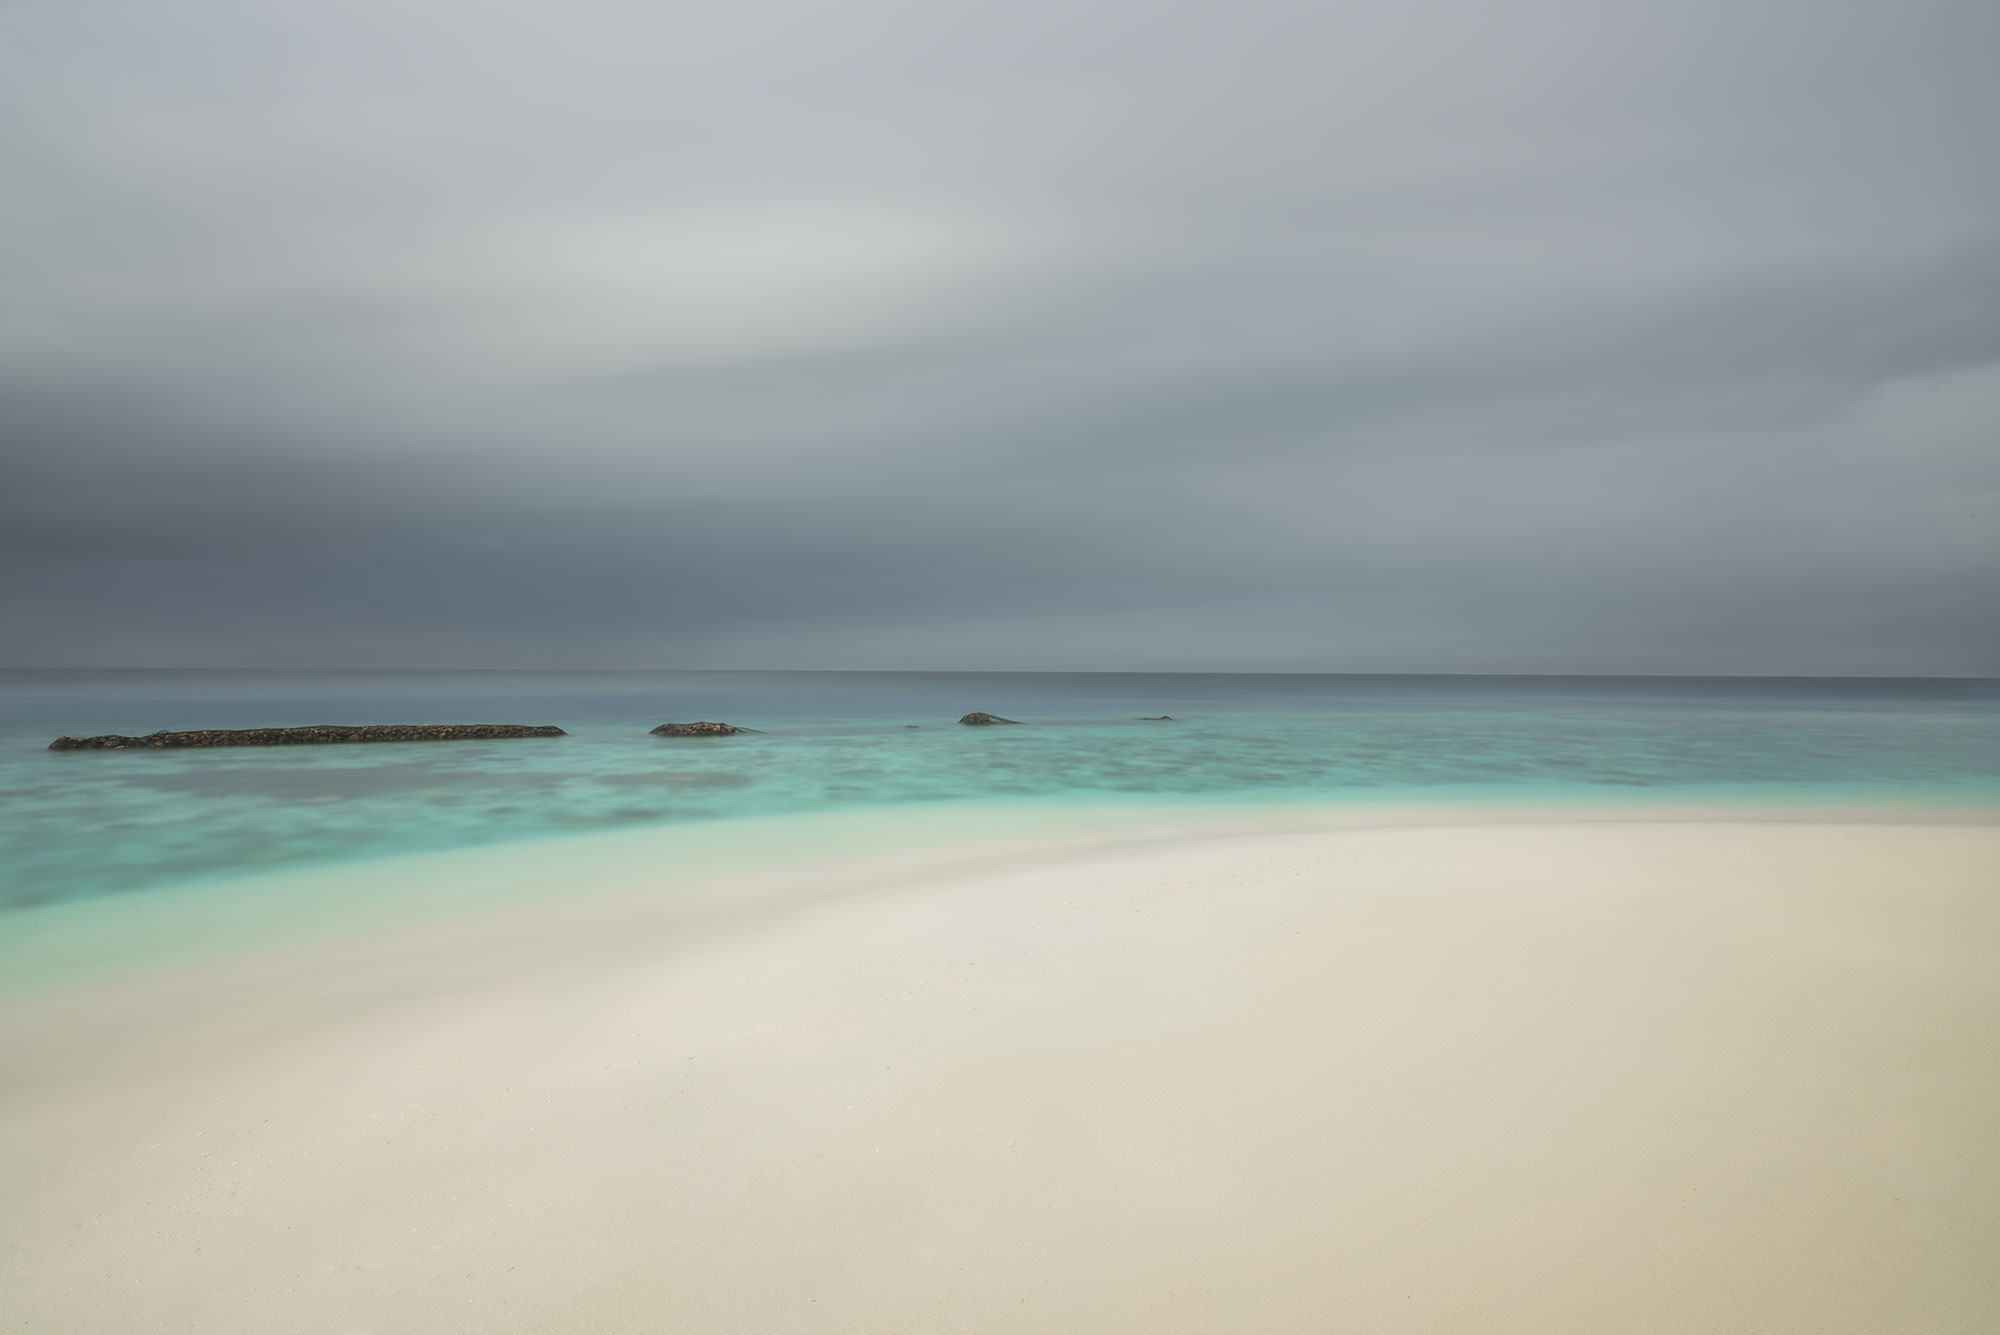 Long exposure landscape photography capturing a rainstorm on the paradise island of Thudufushi in the Maldives. Dark clouds swirl overhead as rain pours down, creating a dramatic and captivating scene.